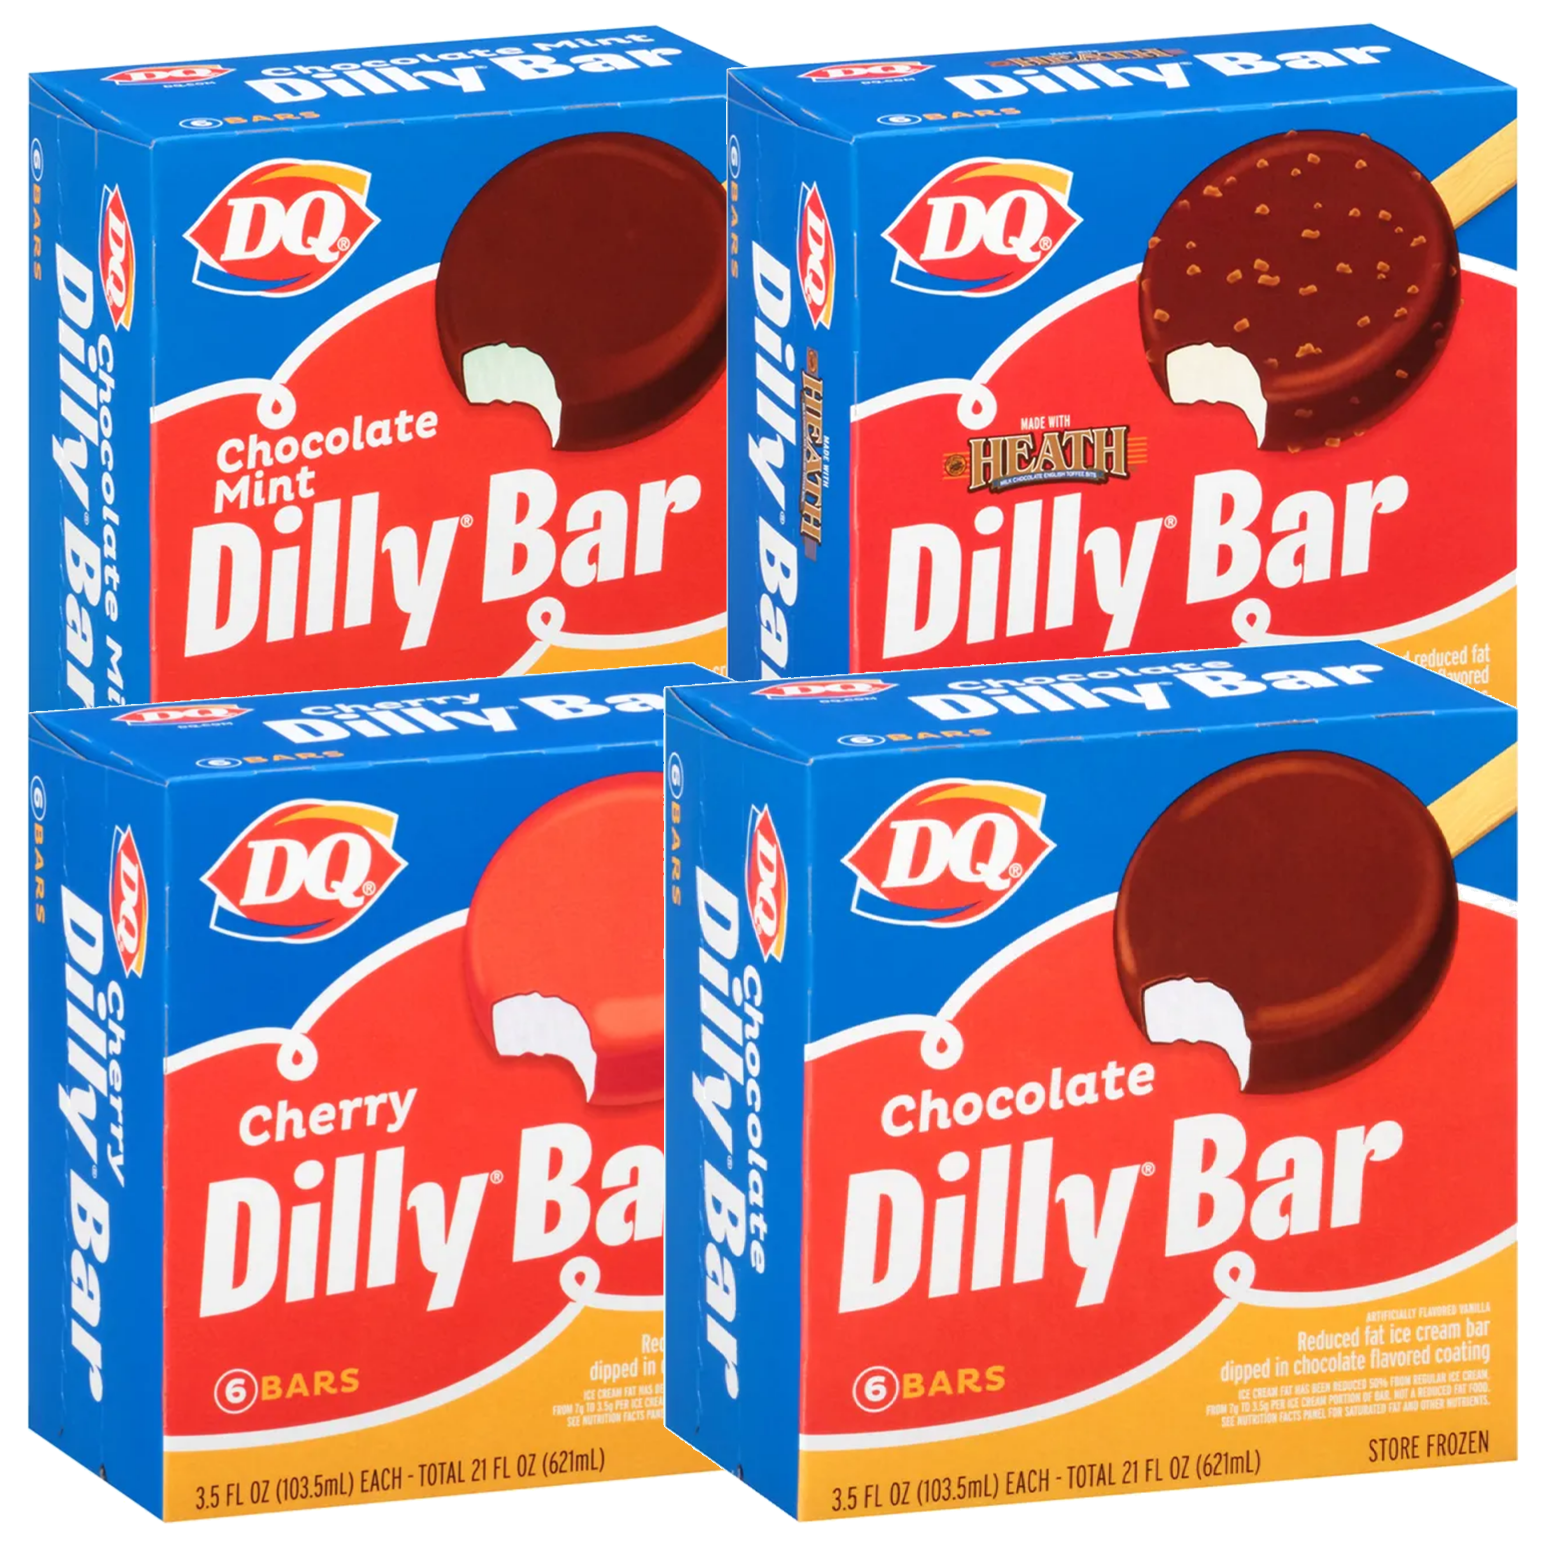 dq dilly bar box price